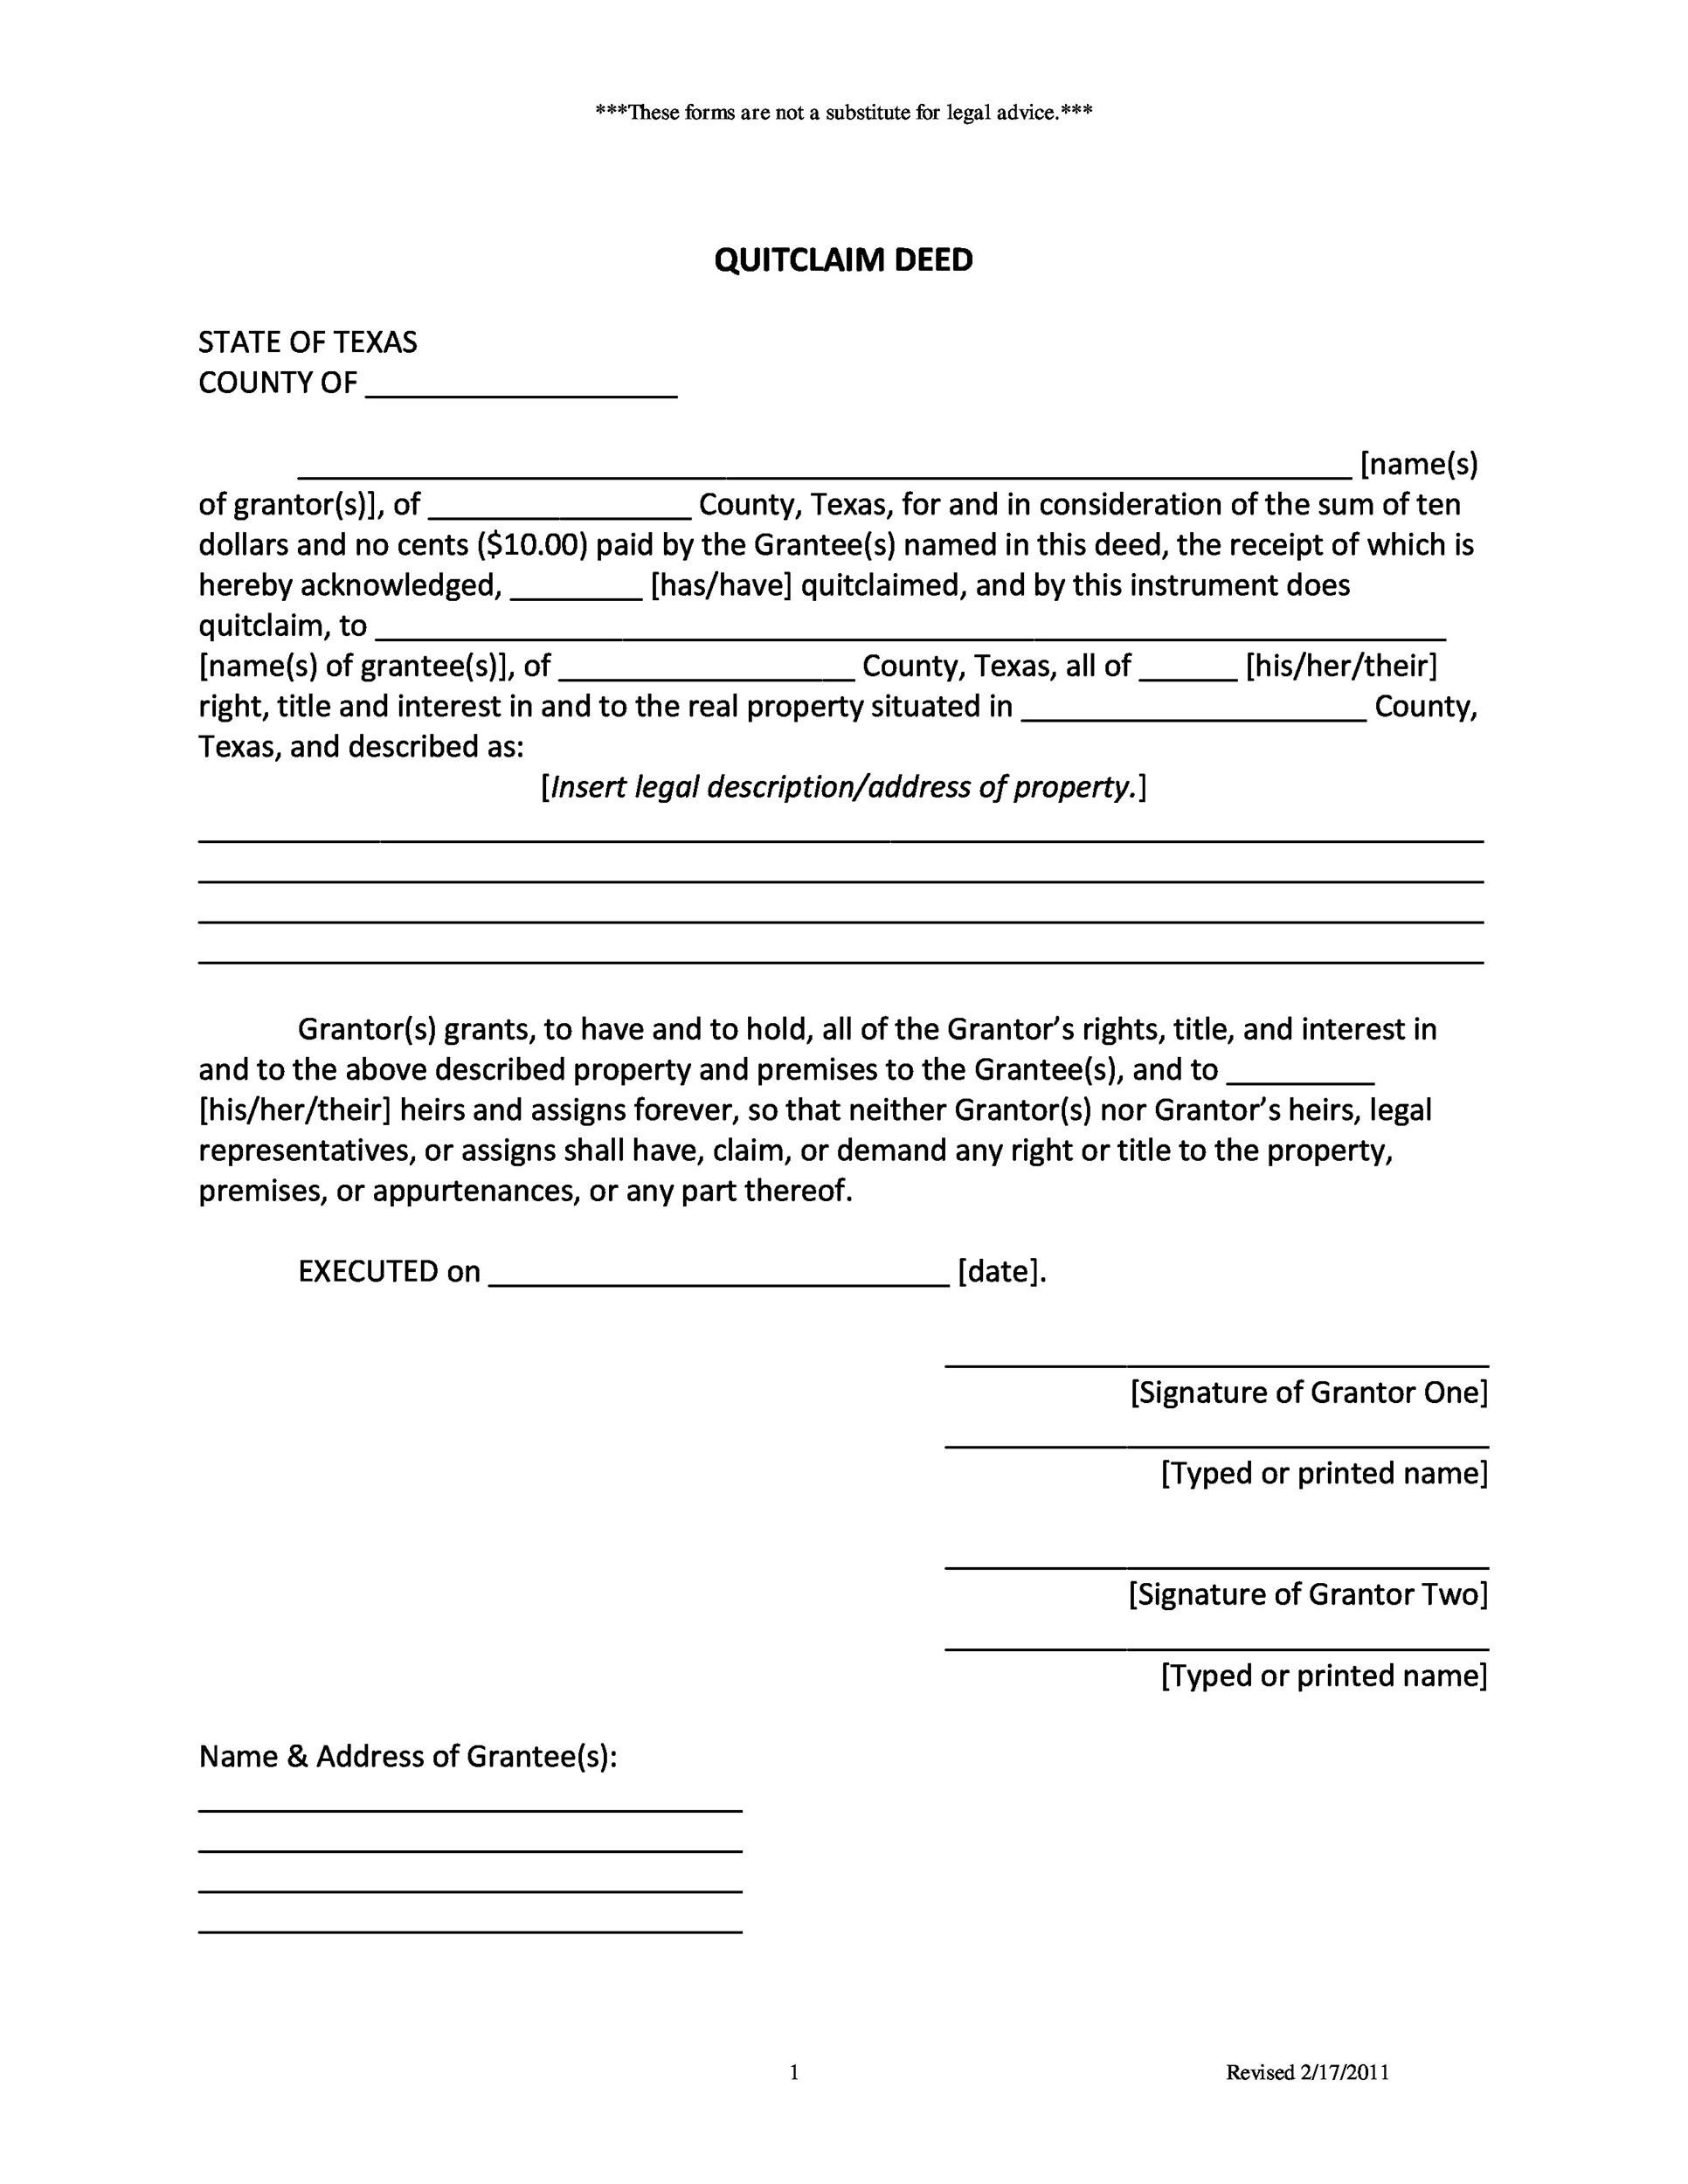 46 Free Quit Claim Deed Forms Templates Template Lab